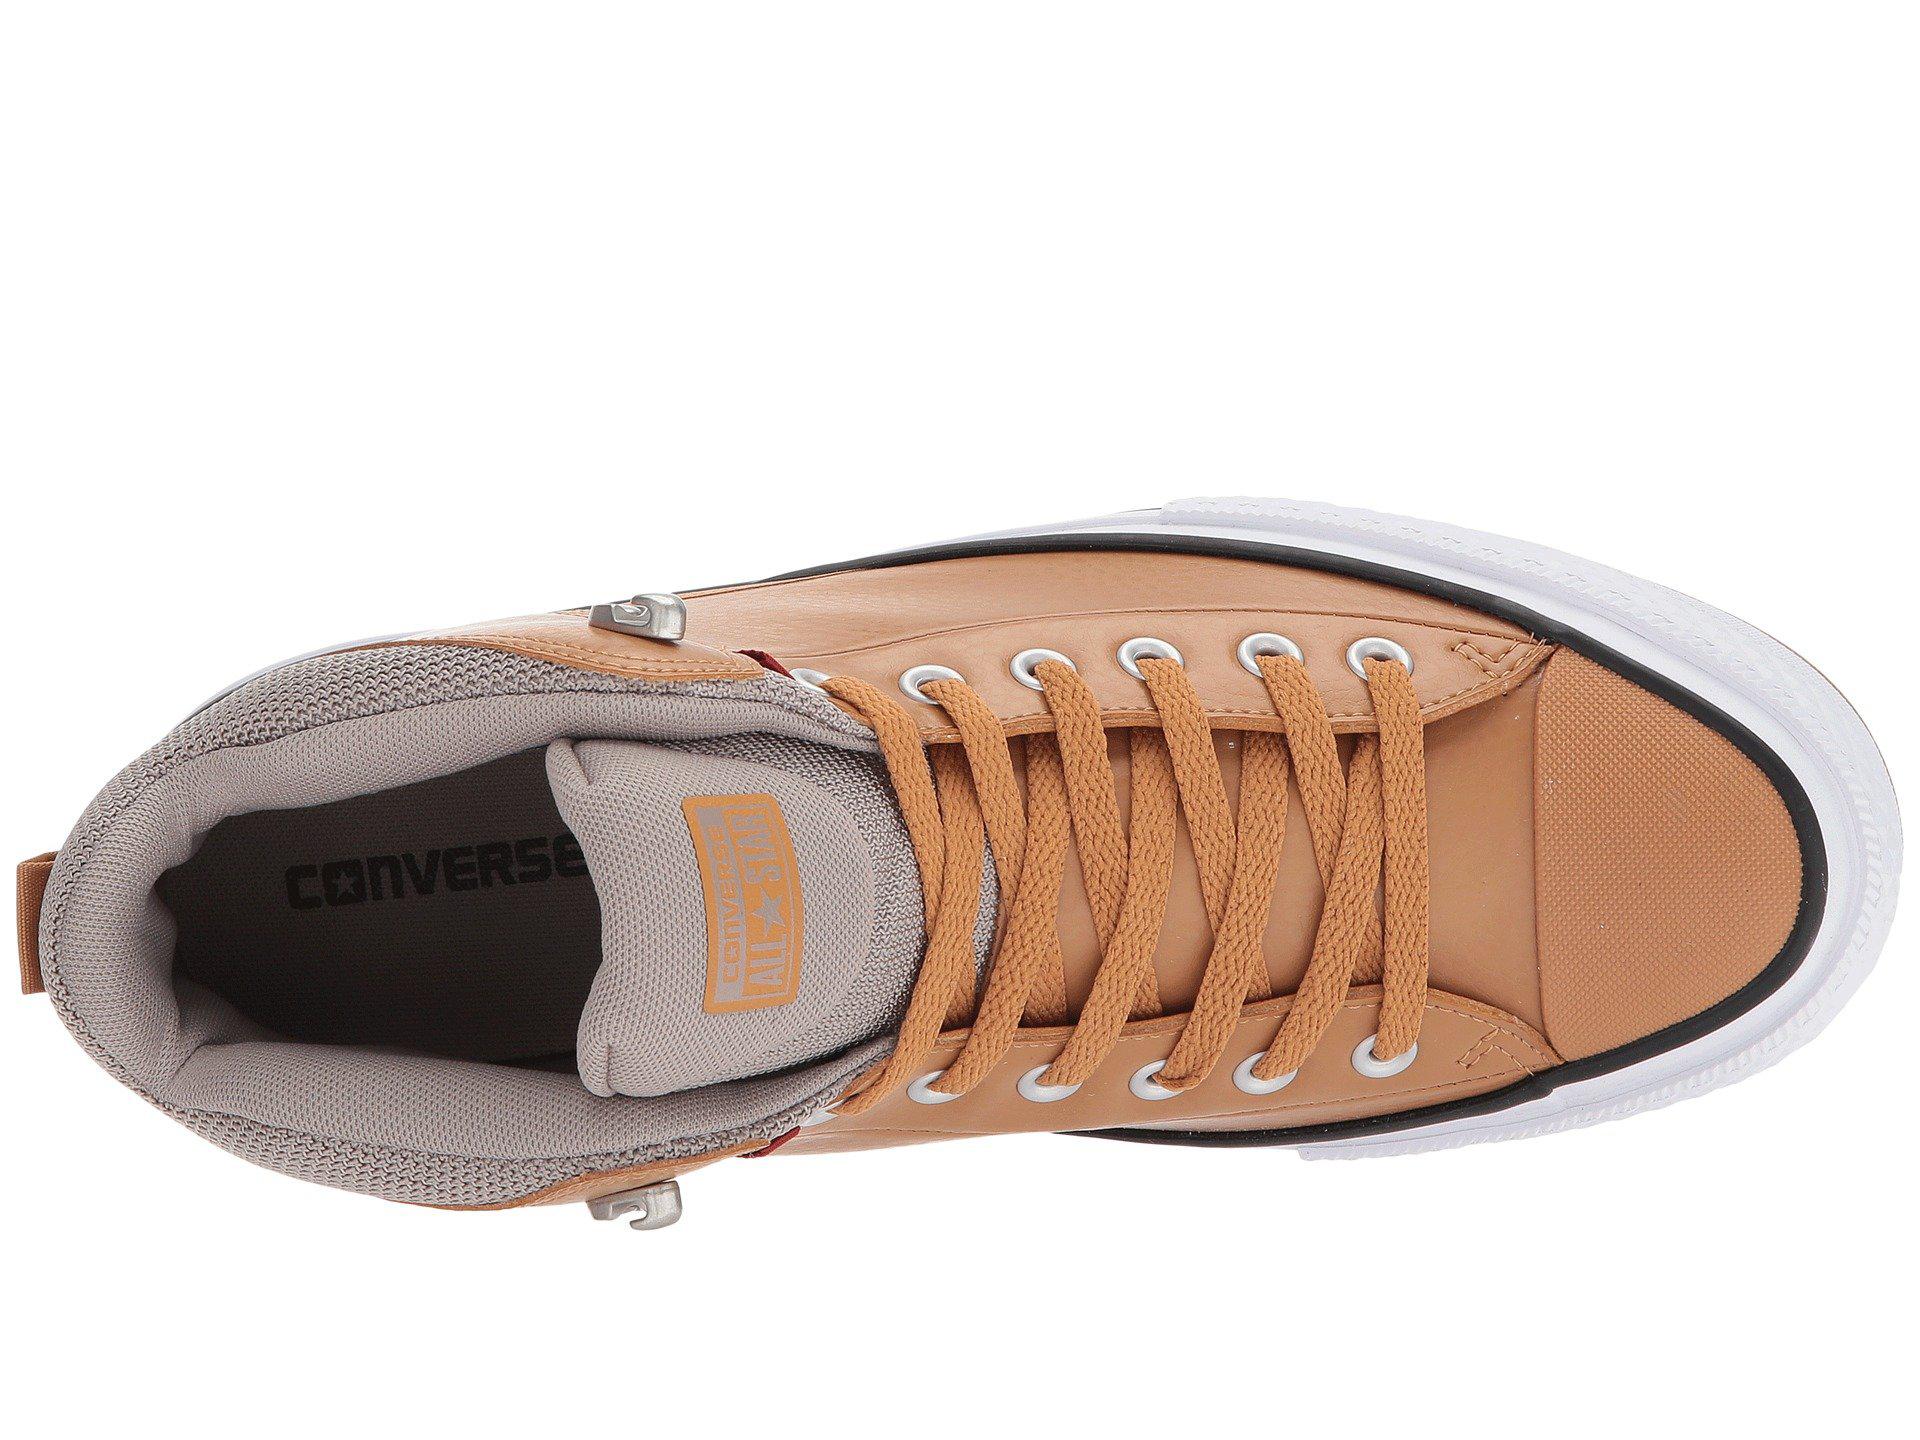 converse chuck taylor all star street sneaker boots in tan